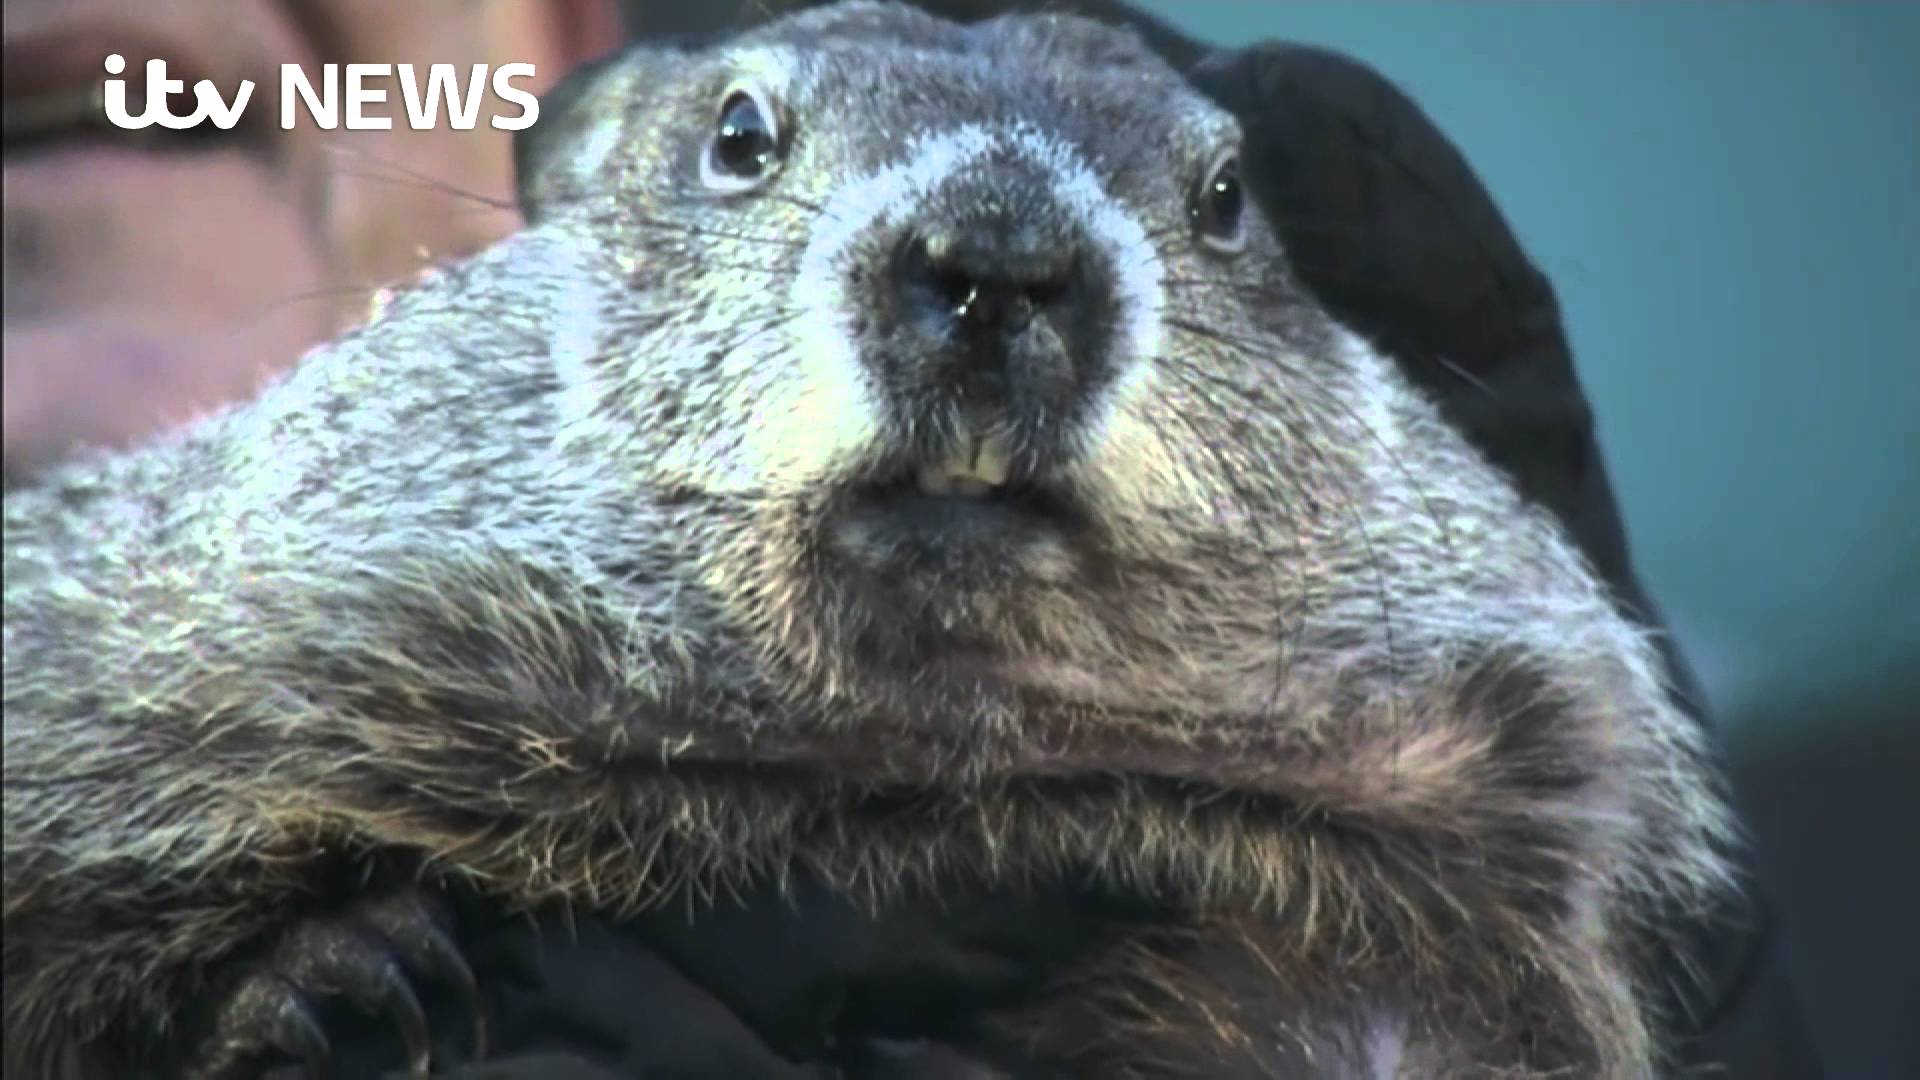 Groundhog Day: Punxsutawney Phil predicts an early spring